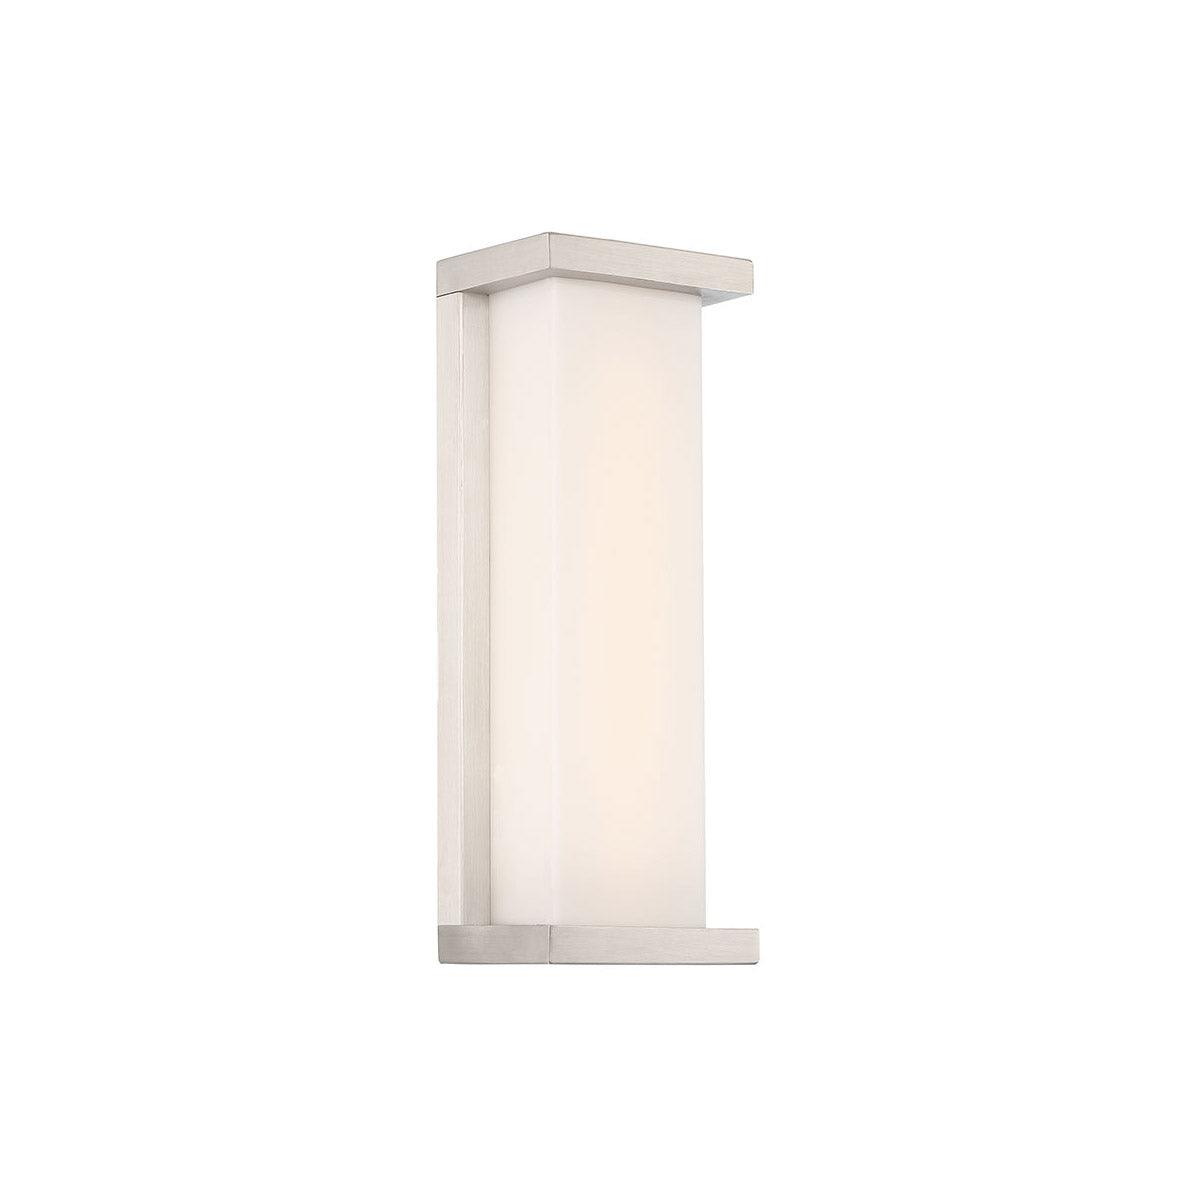 Case 14 in. LED Outdoor Wall Sconce 3000K